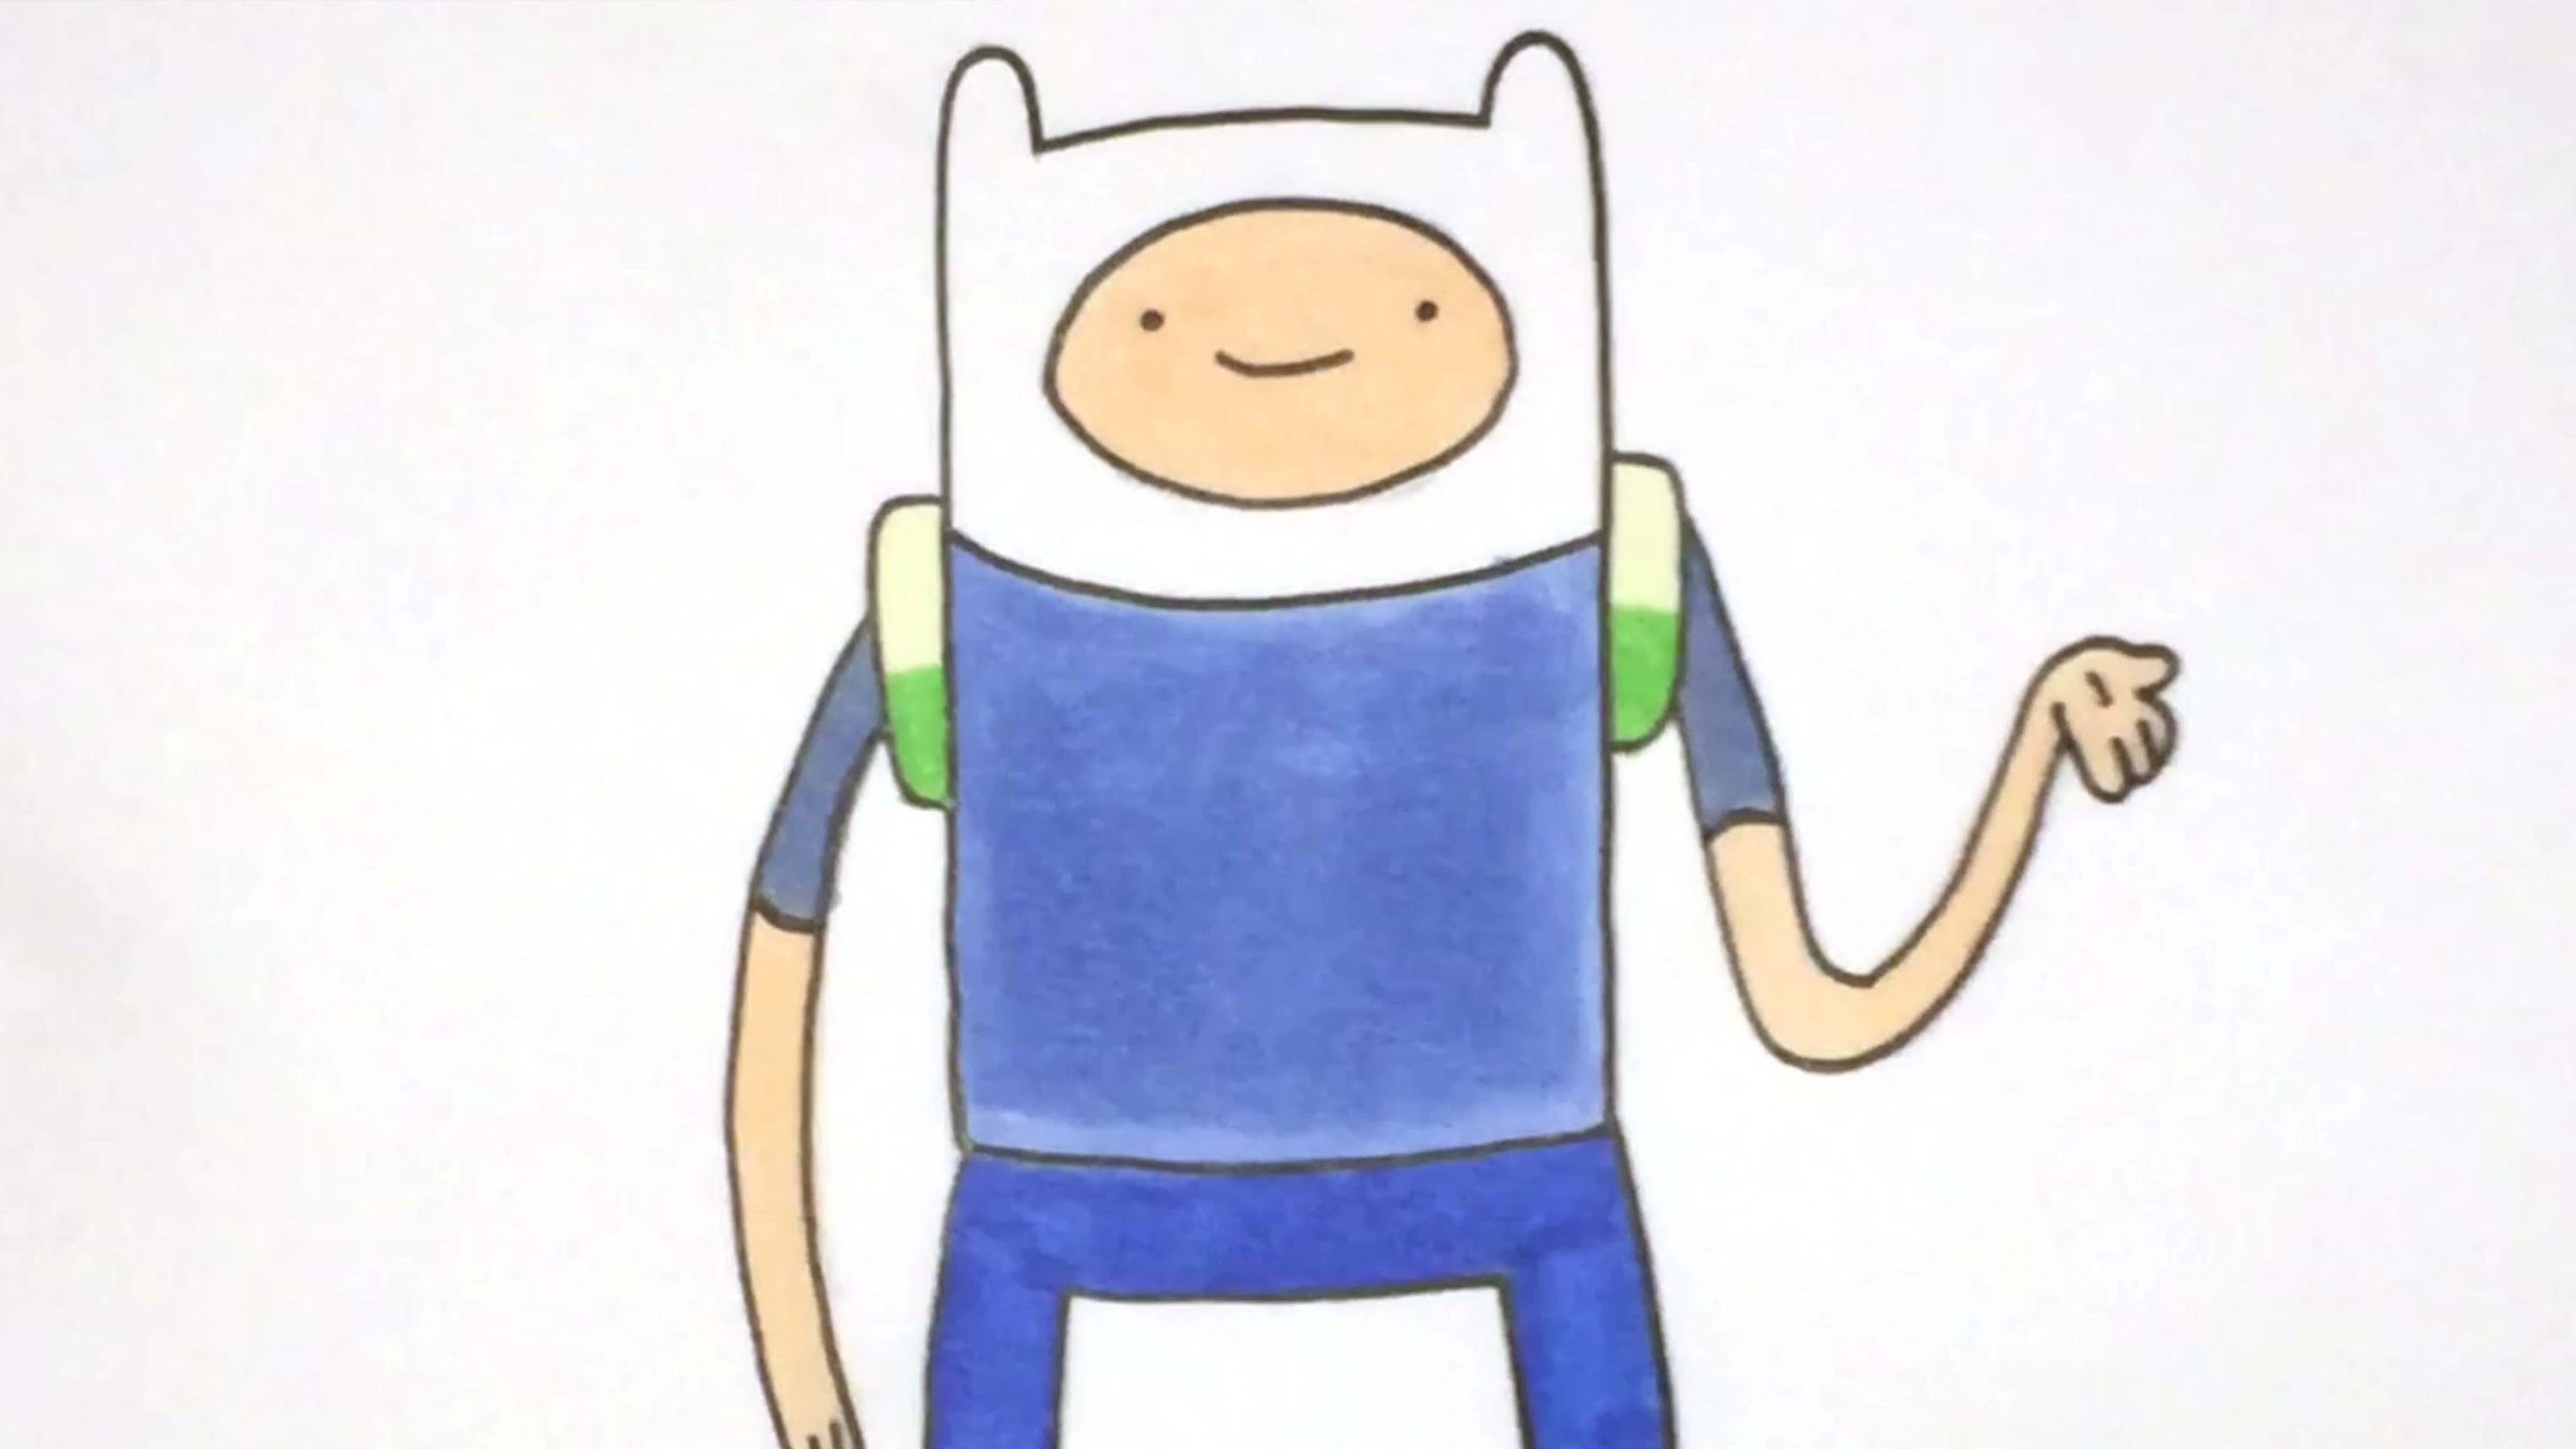 How to draw Finn [Adventure Time] drawing tutorial